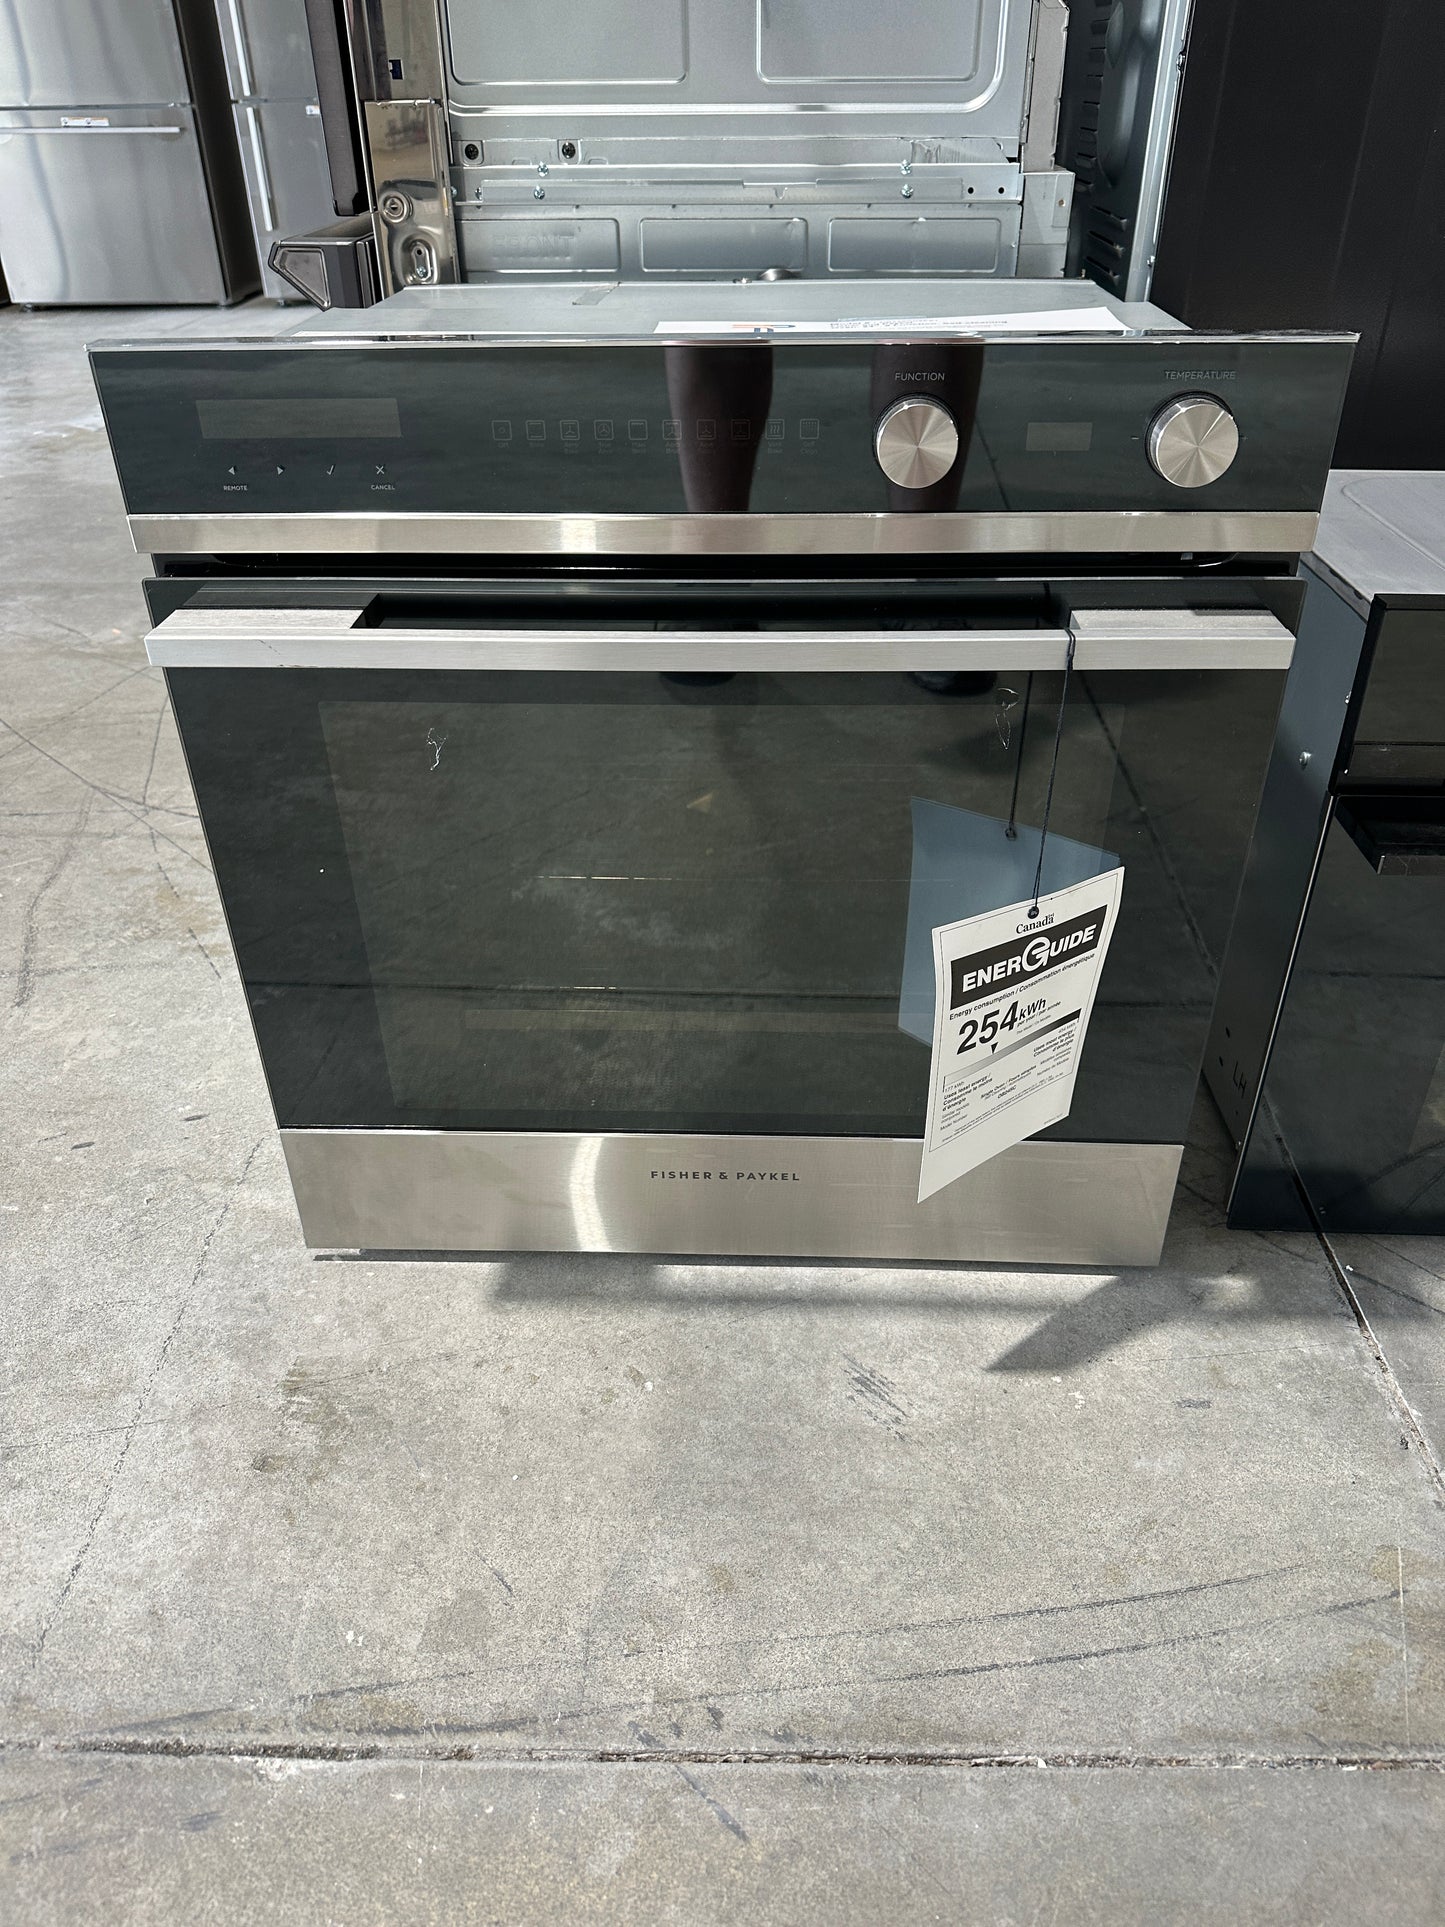 GREAT NEW FISHER & PAYKEL 24 INCH WALL OVEN - WOV11167S OB24SCD9PX1